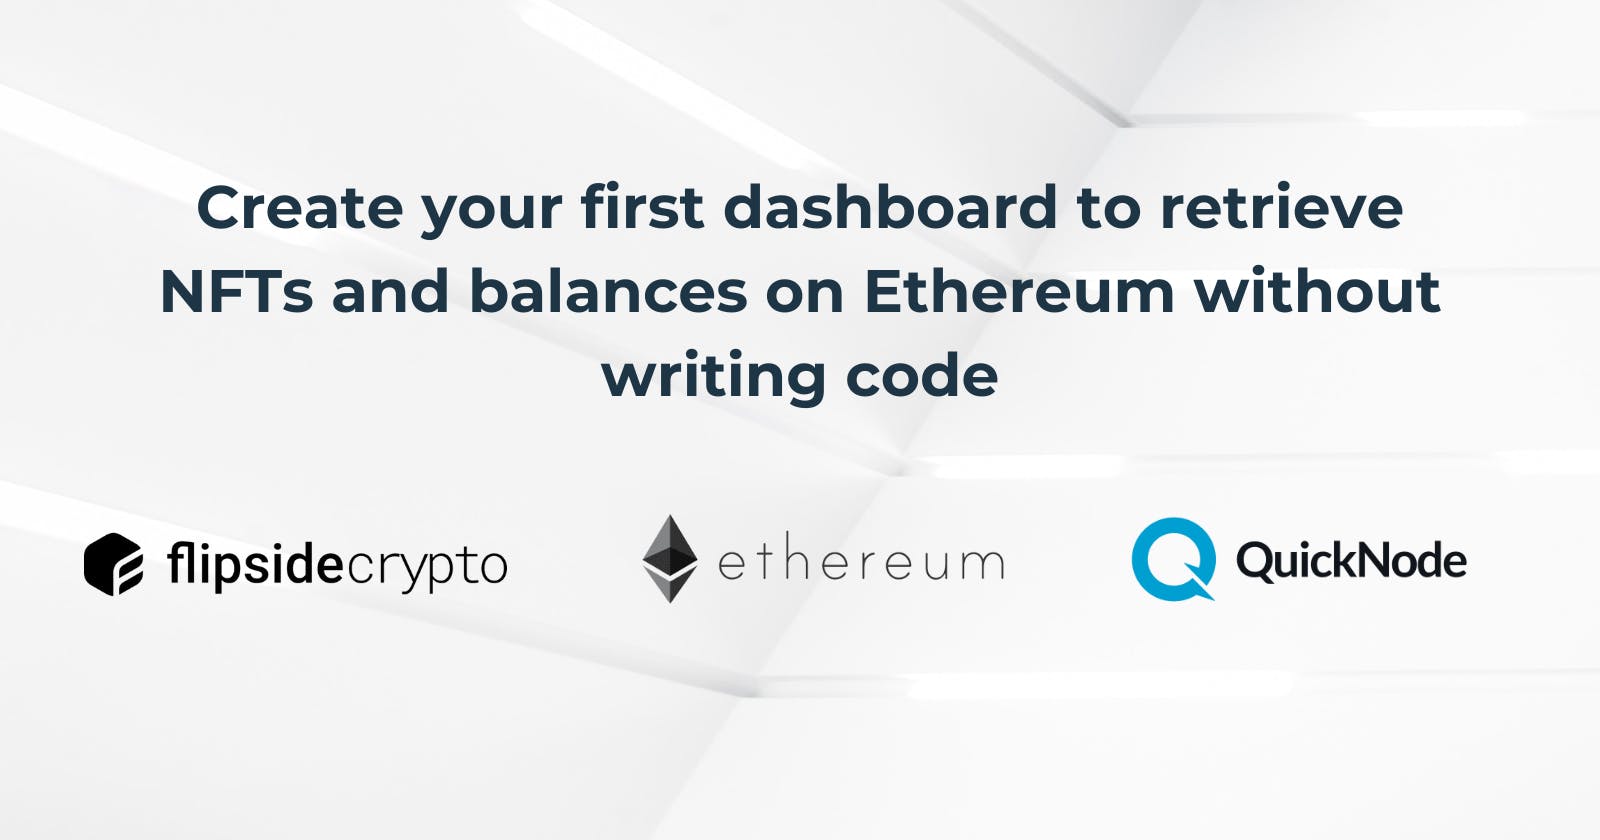 Create your first dashboard to retrieve NFTs and balances on Ethereum without writing code